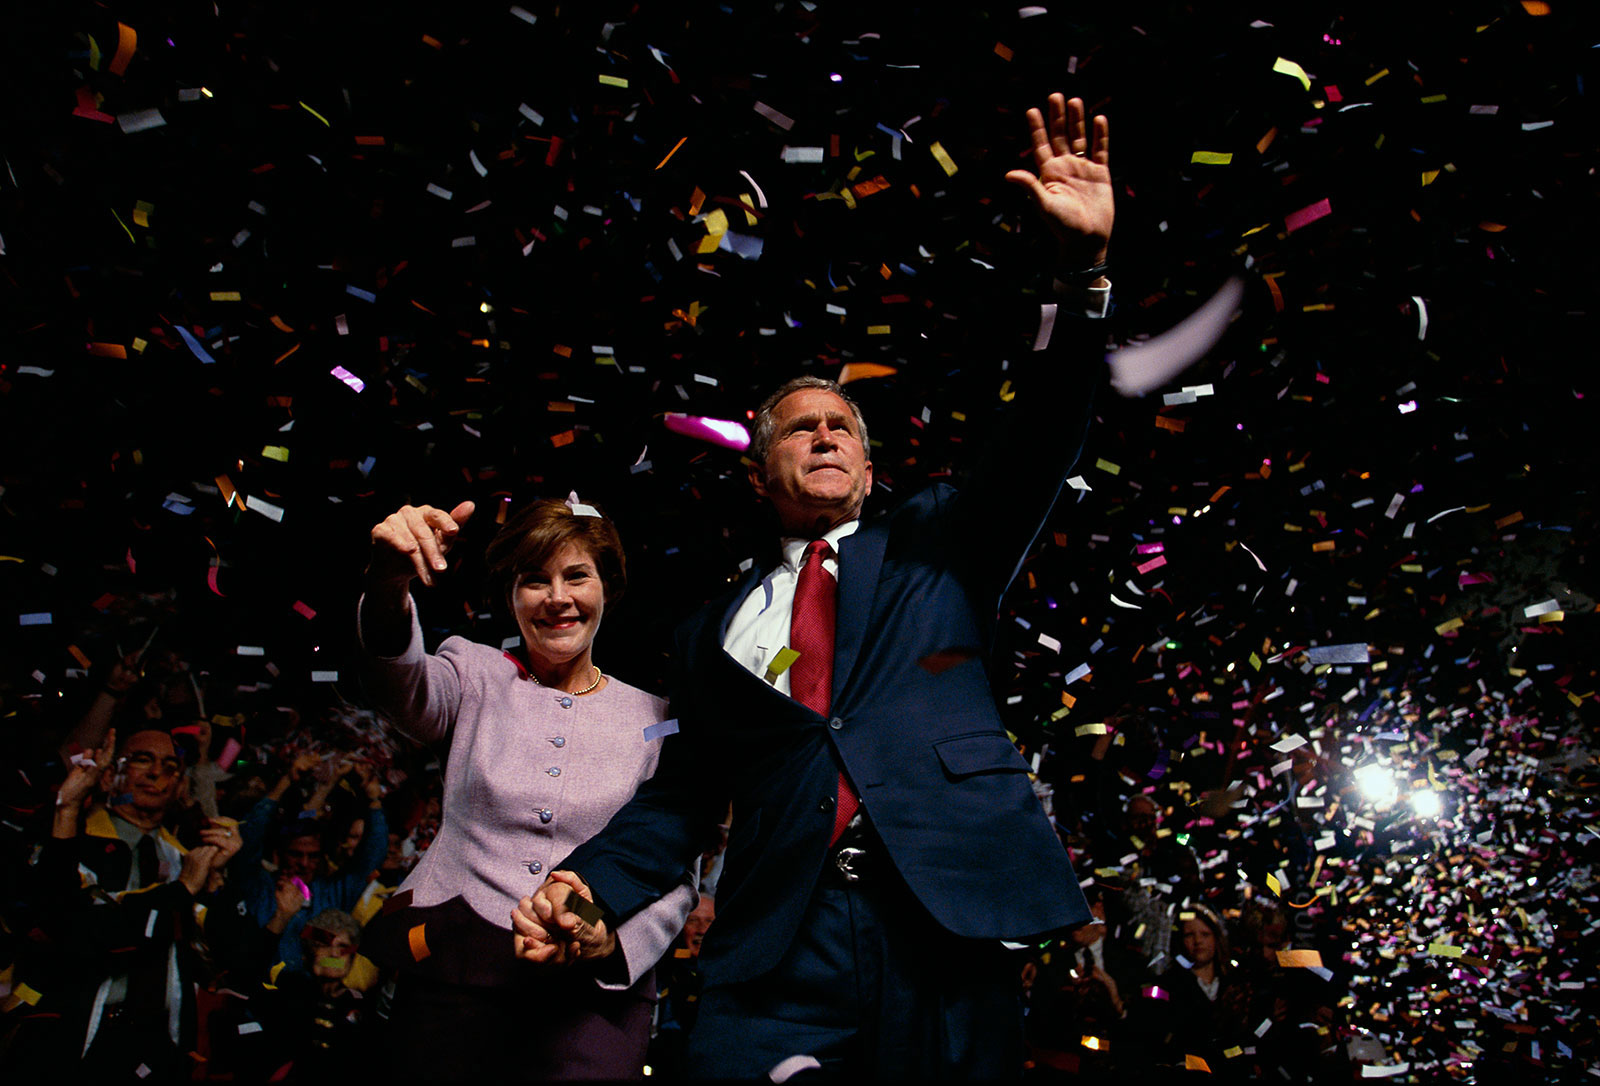 Former President George W. Bush and former first lady Laura Bush appear at a campaign rally in Chattanooga, Tennessee, in 2000.